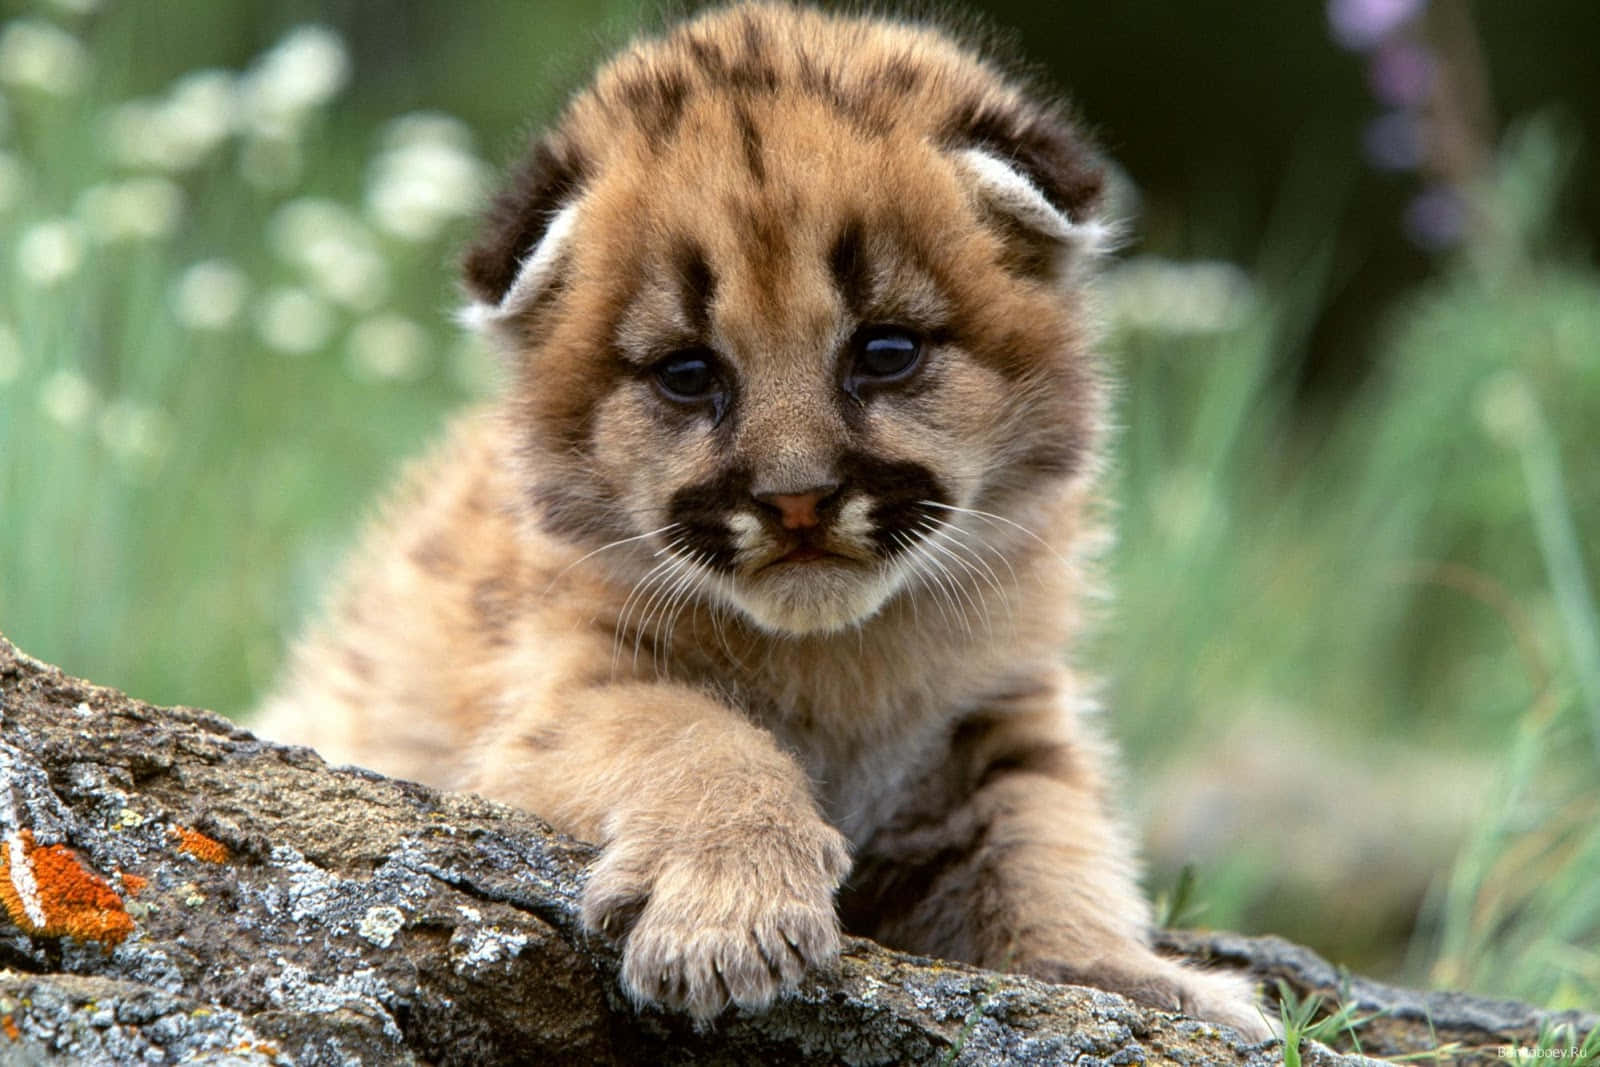 A baby cheetah looks on curiously Wallpaper